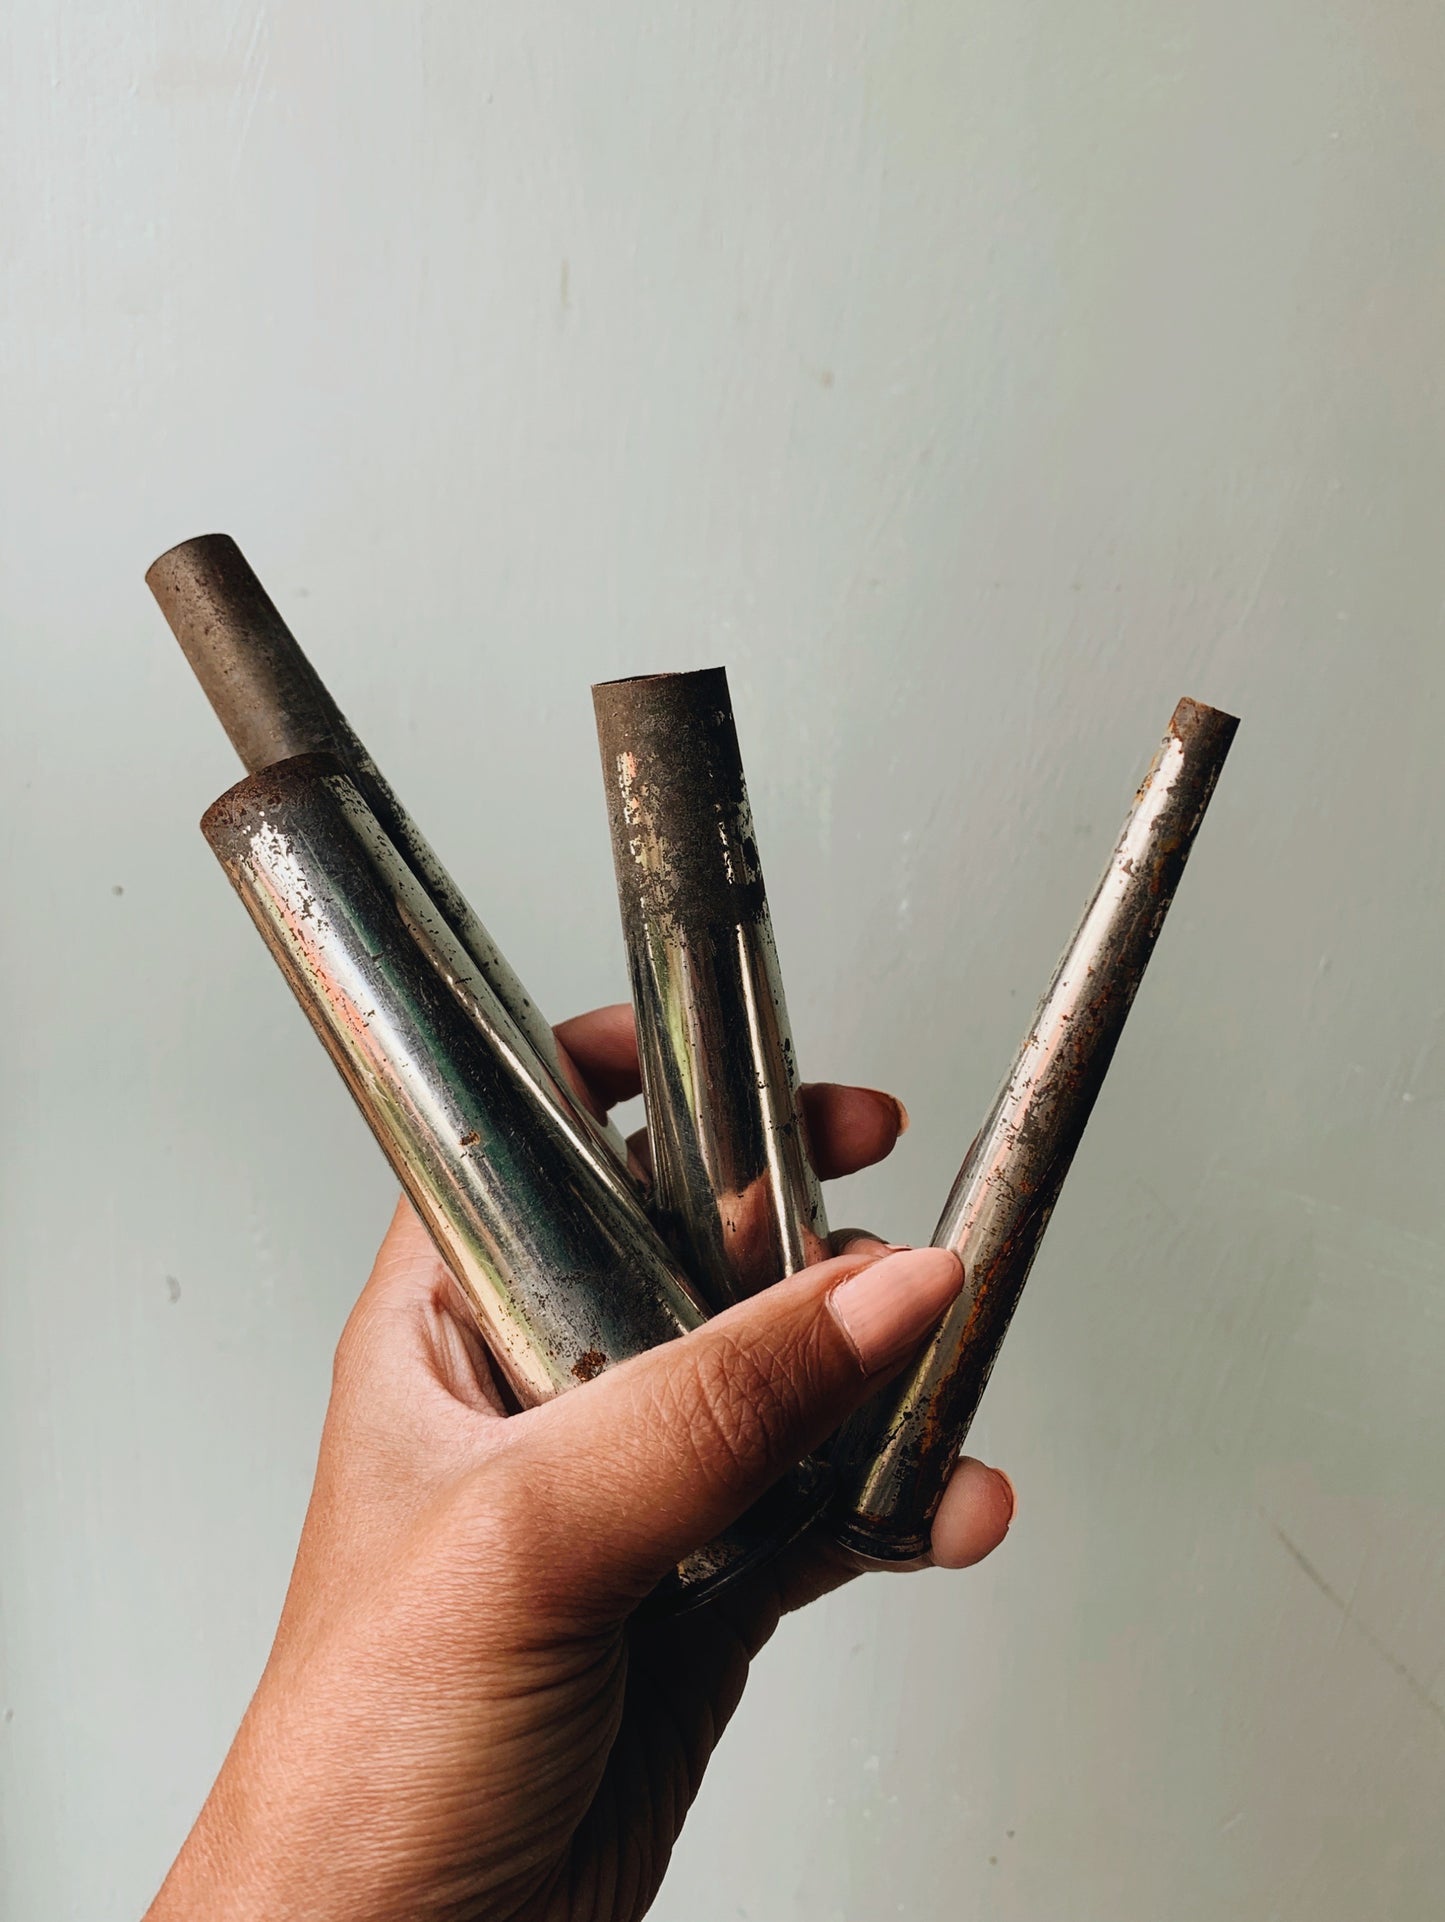 Eight Vintage Pipping Nozzles